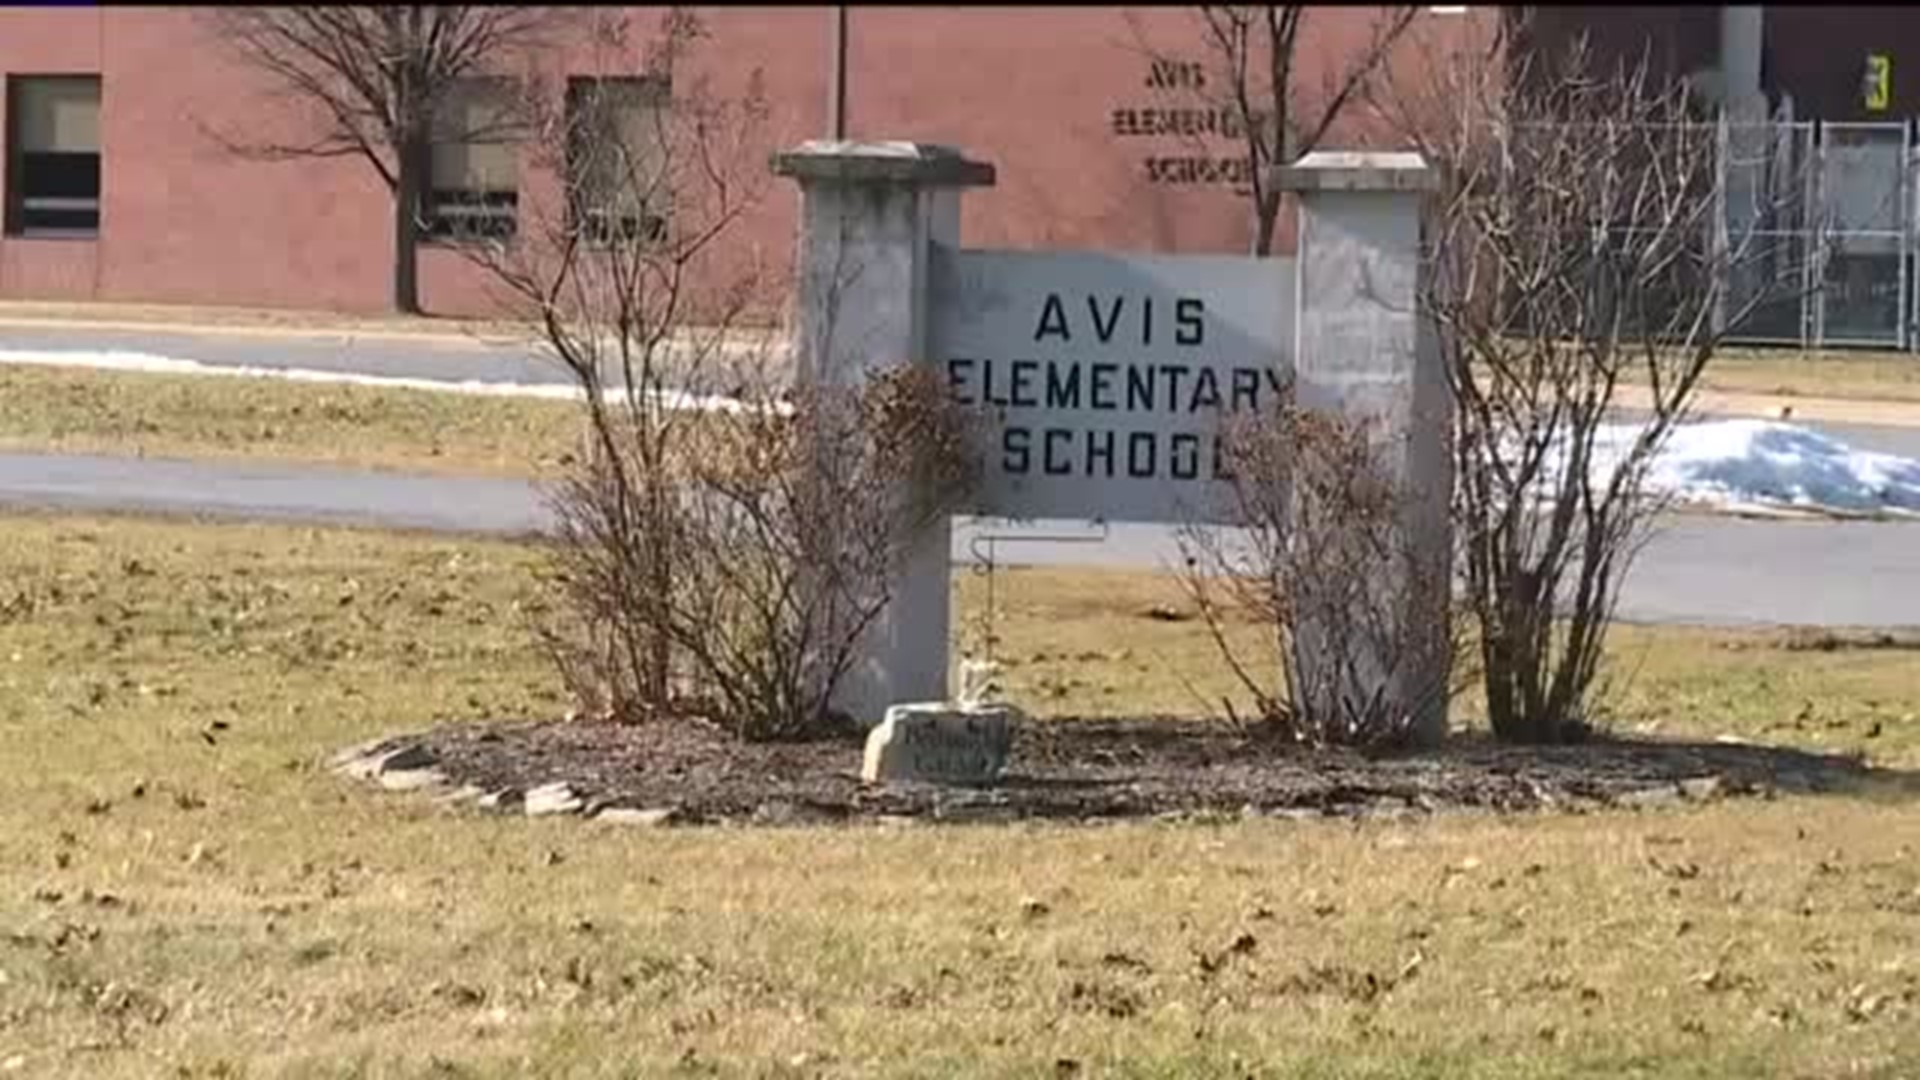 Students, Parents Concerned Over Possible Elementary School Closures in Lycoming County